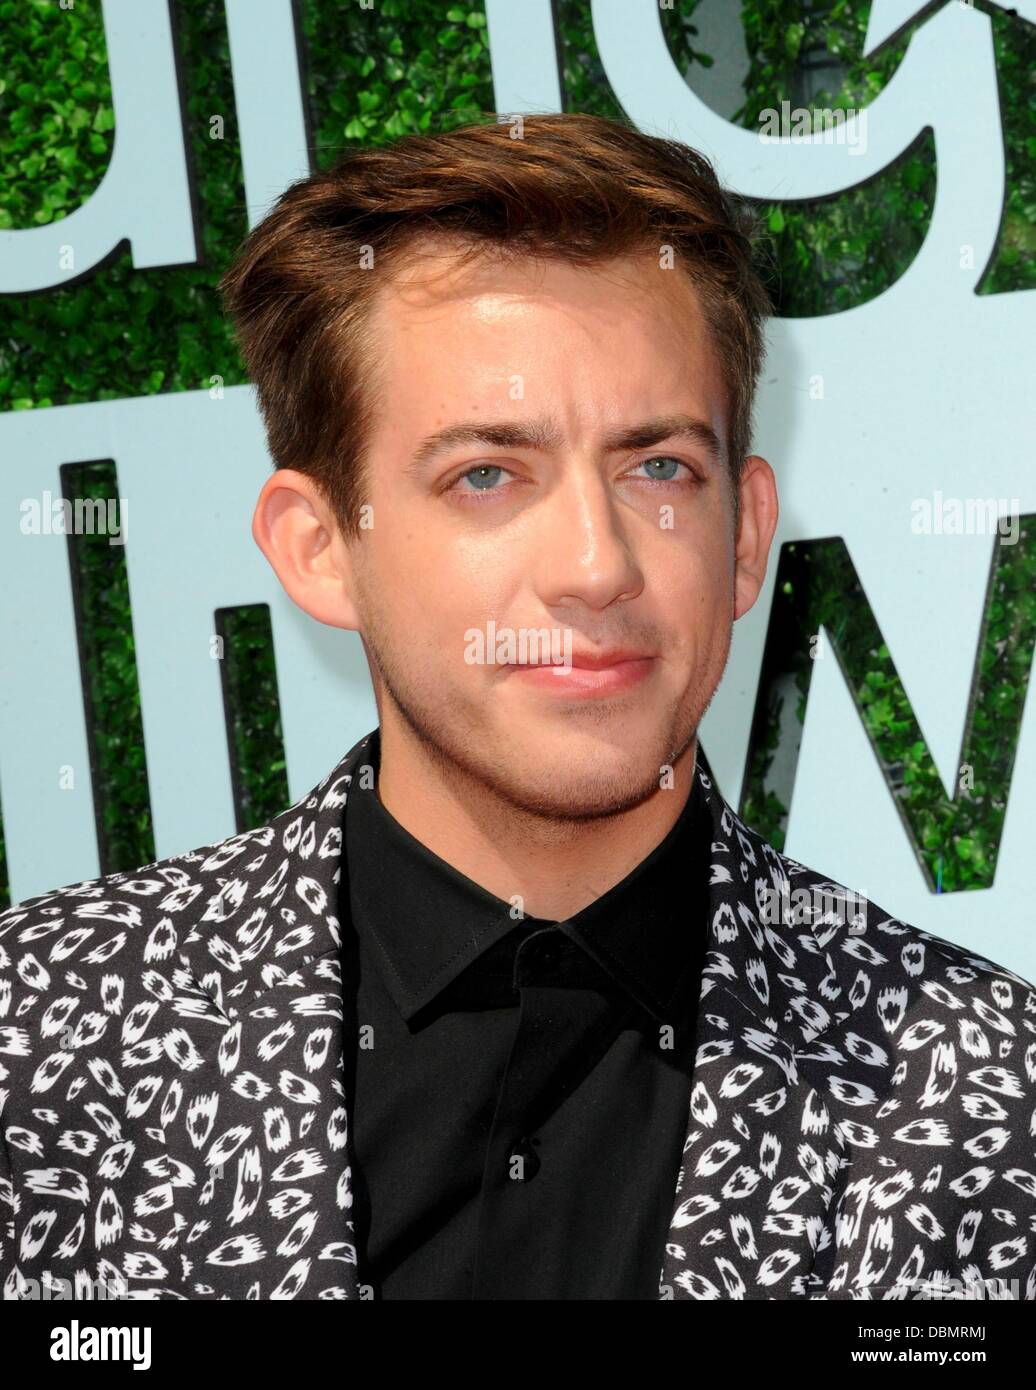 Santa Monica, CA. 1st Aug, 2013. Kevin McHale at arrivals for The 15th Annual Young Hollywood Awards, The Broad Stage, Santa Monica, CA August 1, 2013 Credit: © Elizabeth Goodenough/Everett Collection/Alamy Live News  Stock Photo